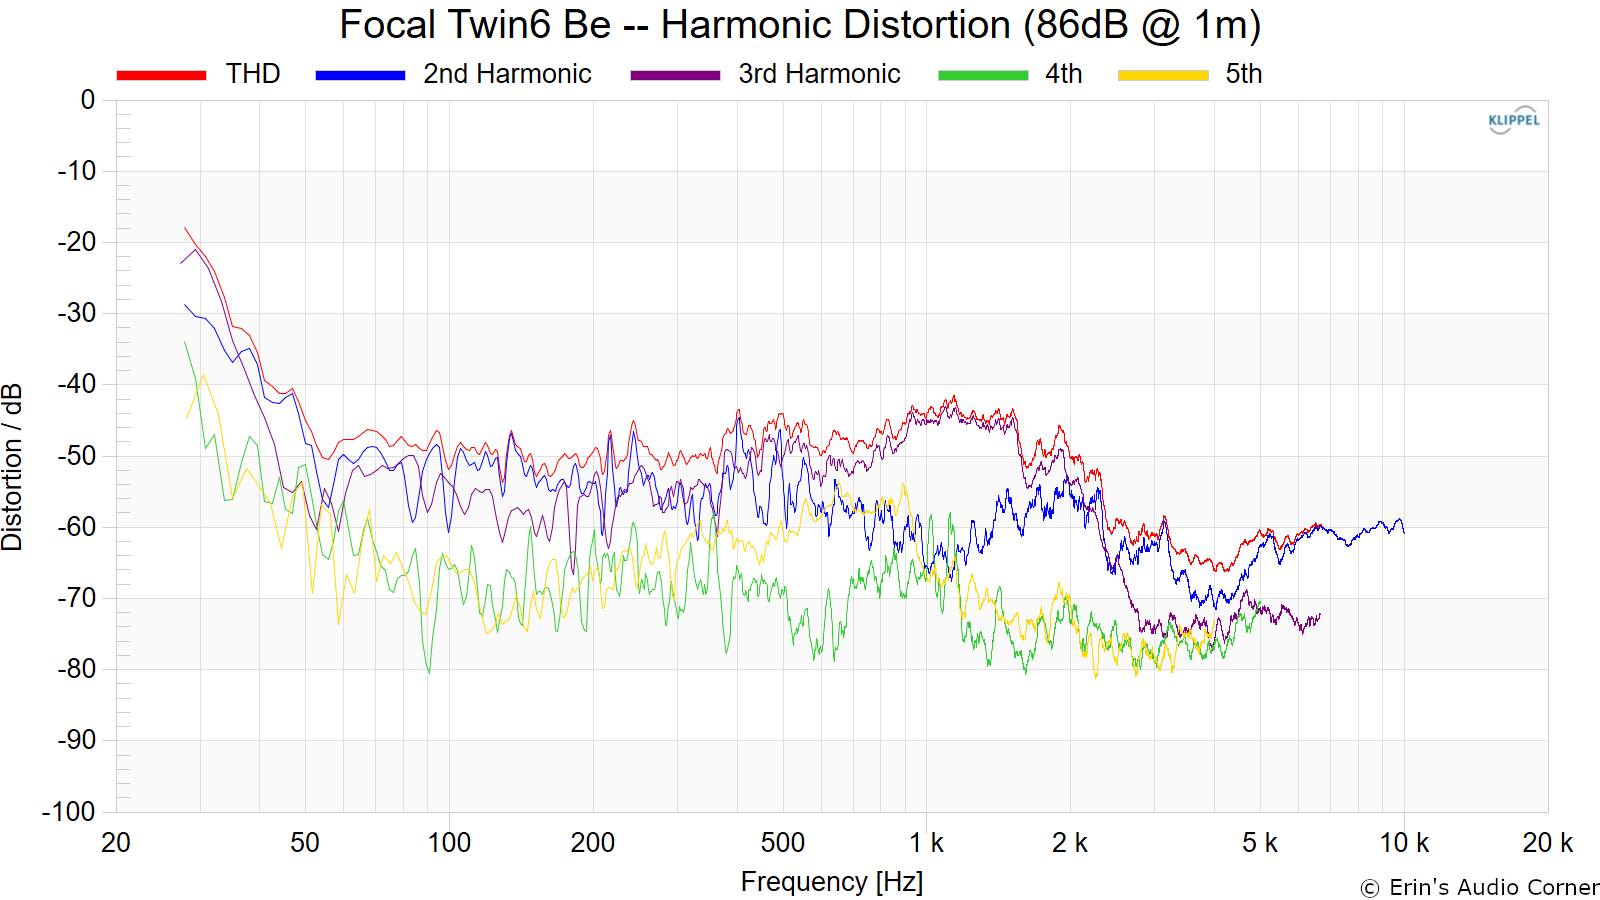 Focal%20Twin6%20Be%20--%20Harmonic%20Distortion%20%2886dB%20%40%201m%29.png